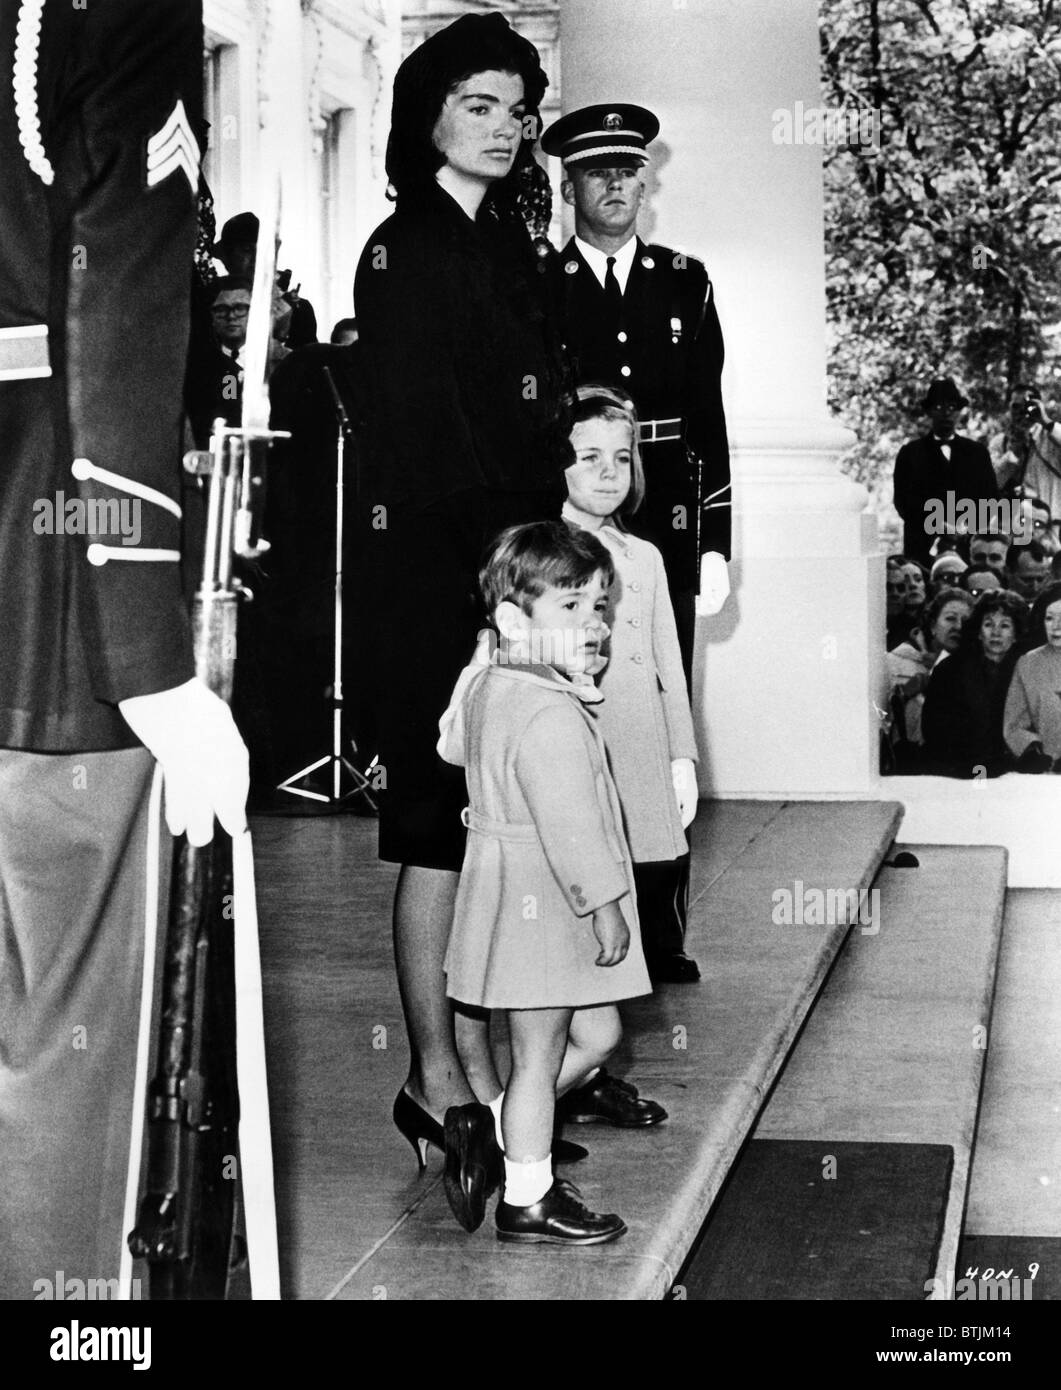 Jacqueline Kennedy with her children John F. Kennedy Jr. and Caroline Kennedy, in a scene from documentary film 'Four Days in No Stock Photo